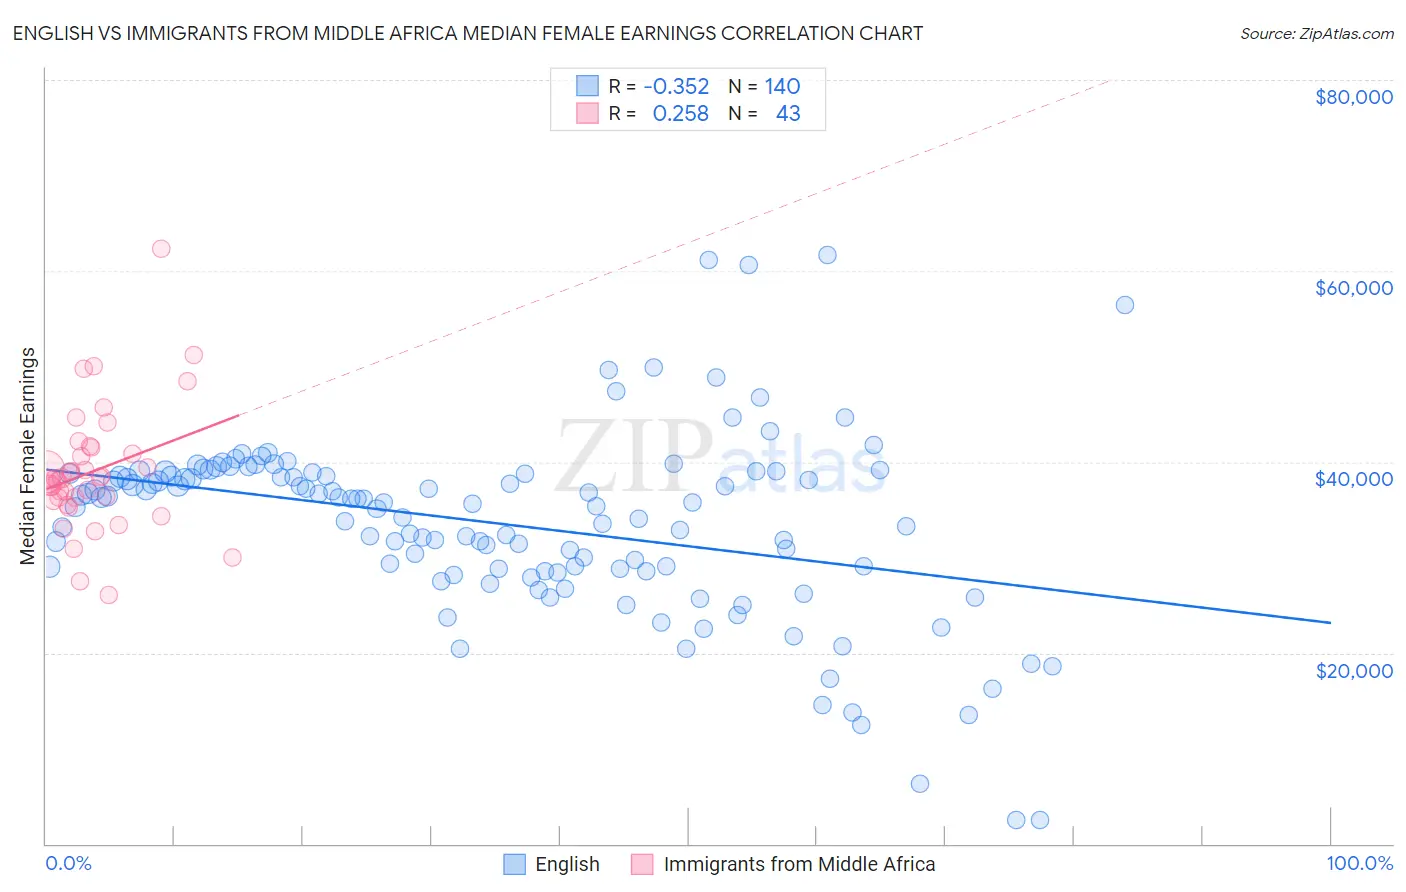 English vs Immigrants from Middle Africa Median Female Earnings